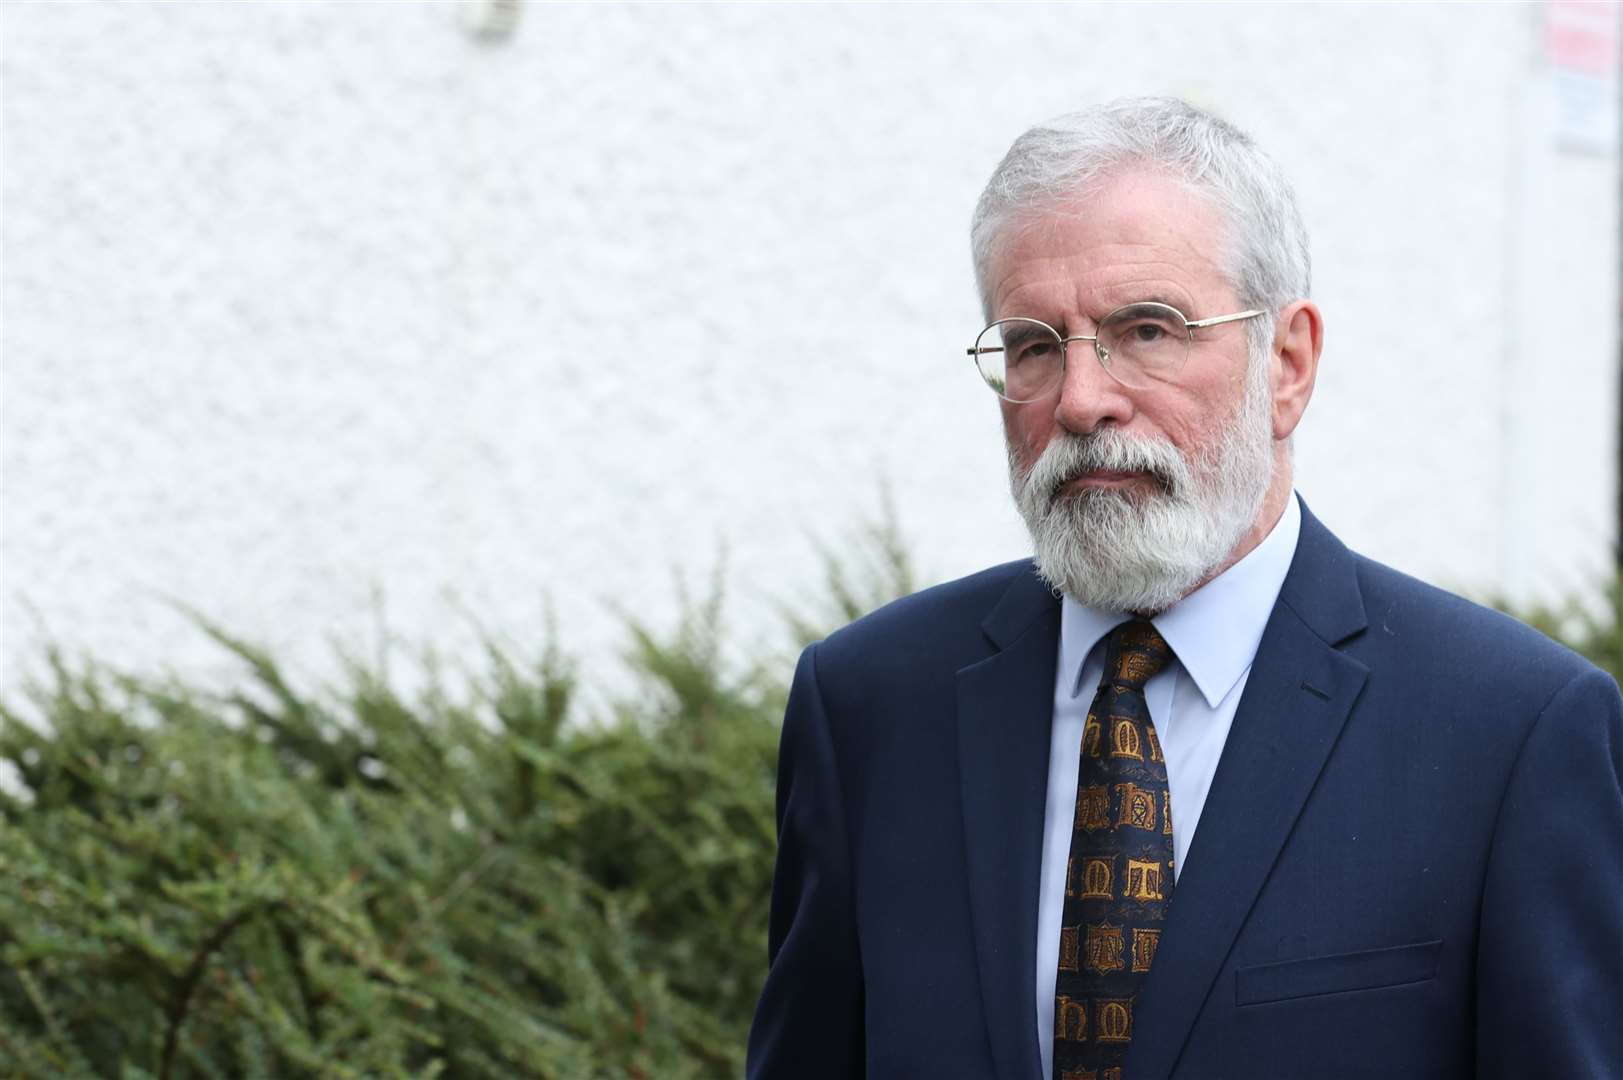 Former Sinn Fein president Gerry Adams at the funeral of Lord Trimble (Liam McBurney/PA)